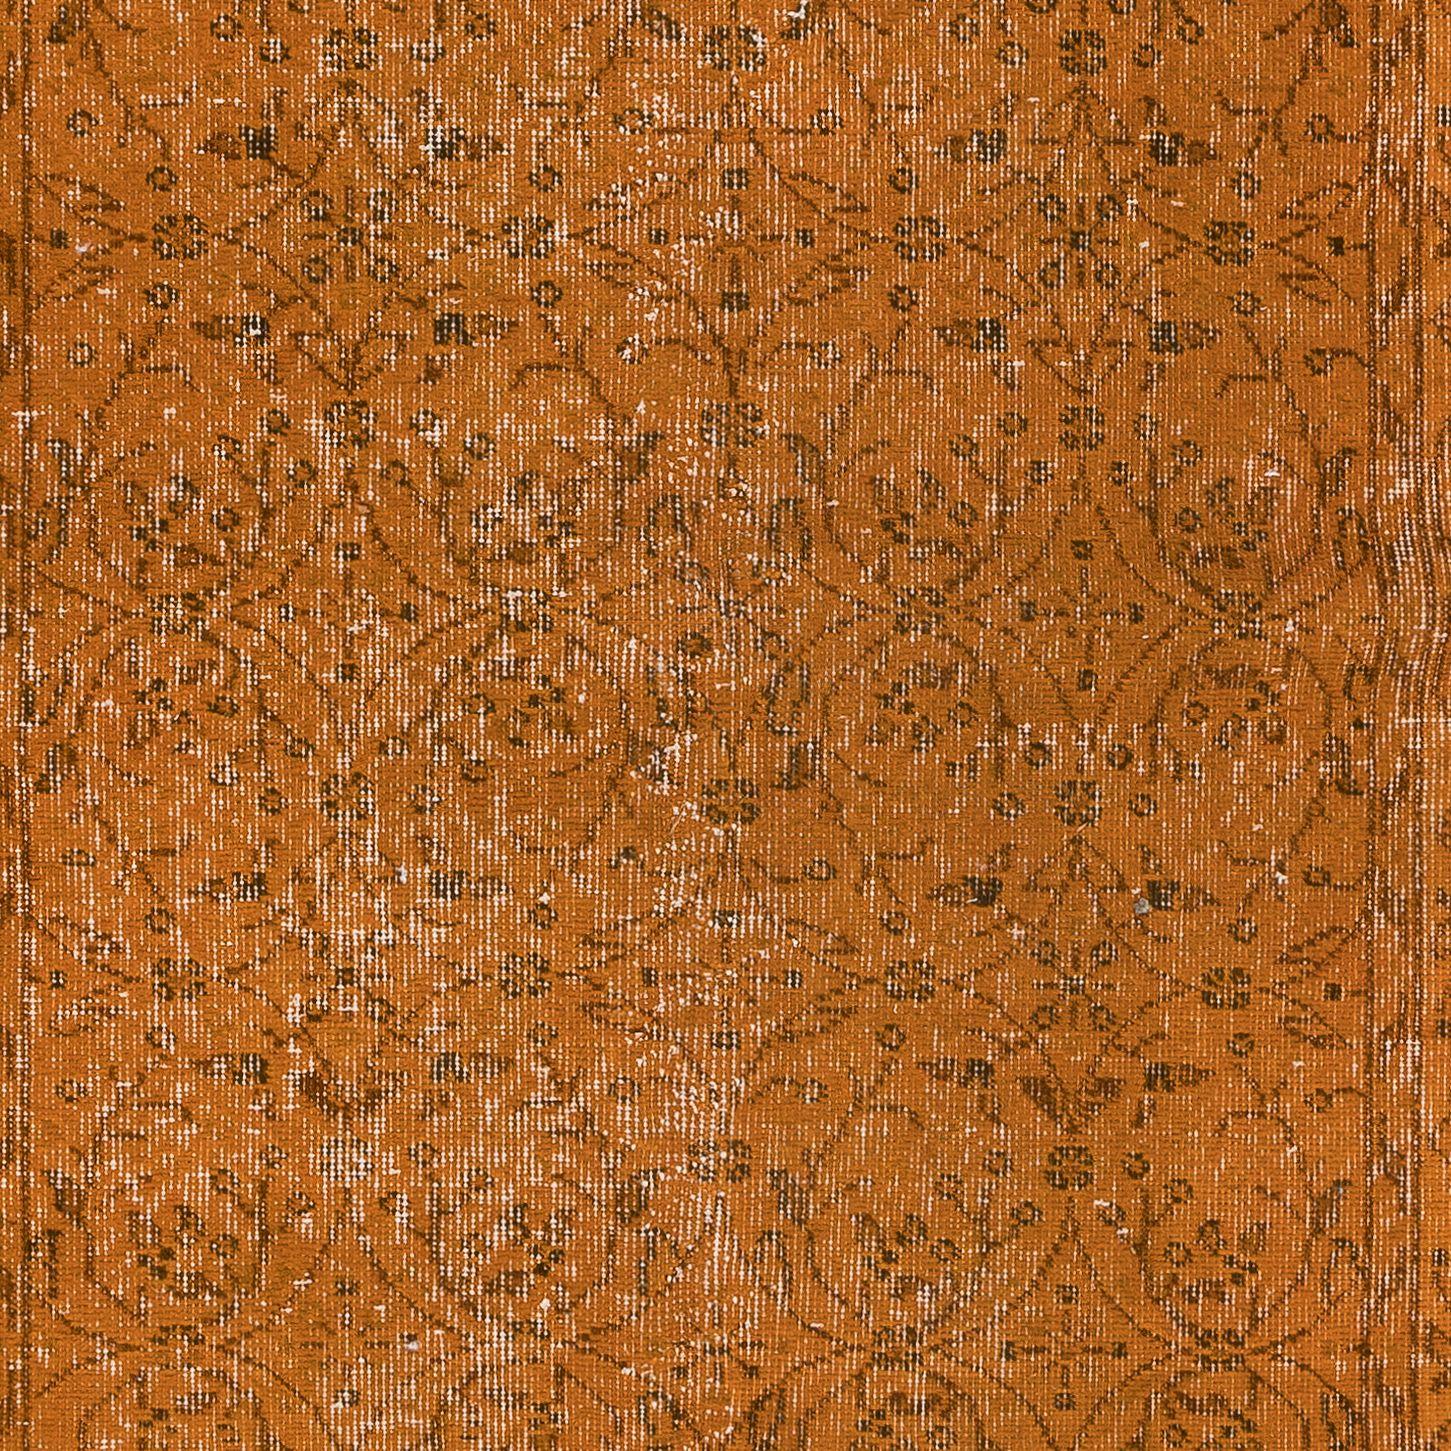 Hand-Knotted 3.7x6.8 Ft Hand-Made Turkish Accent Rug in Orange, Modern Floral Pattern Carpet For Sale